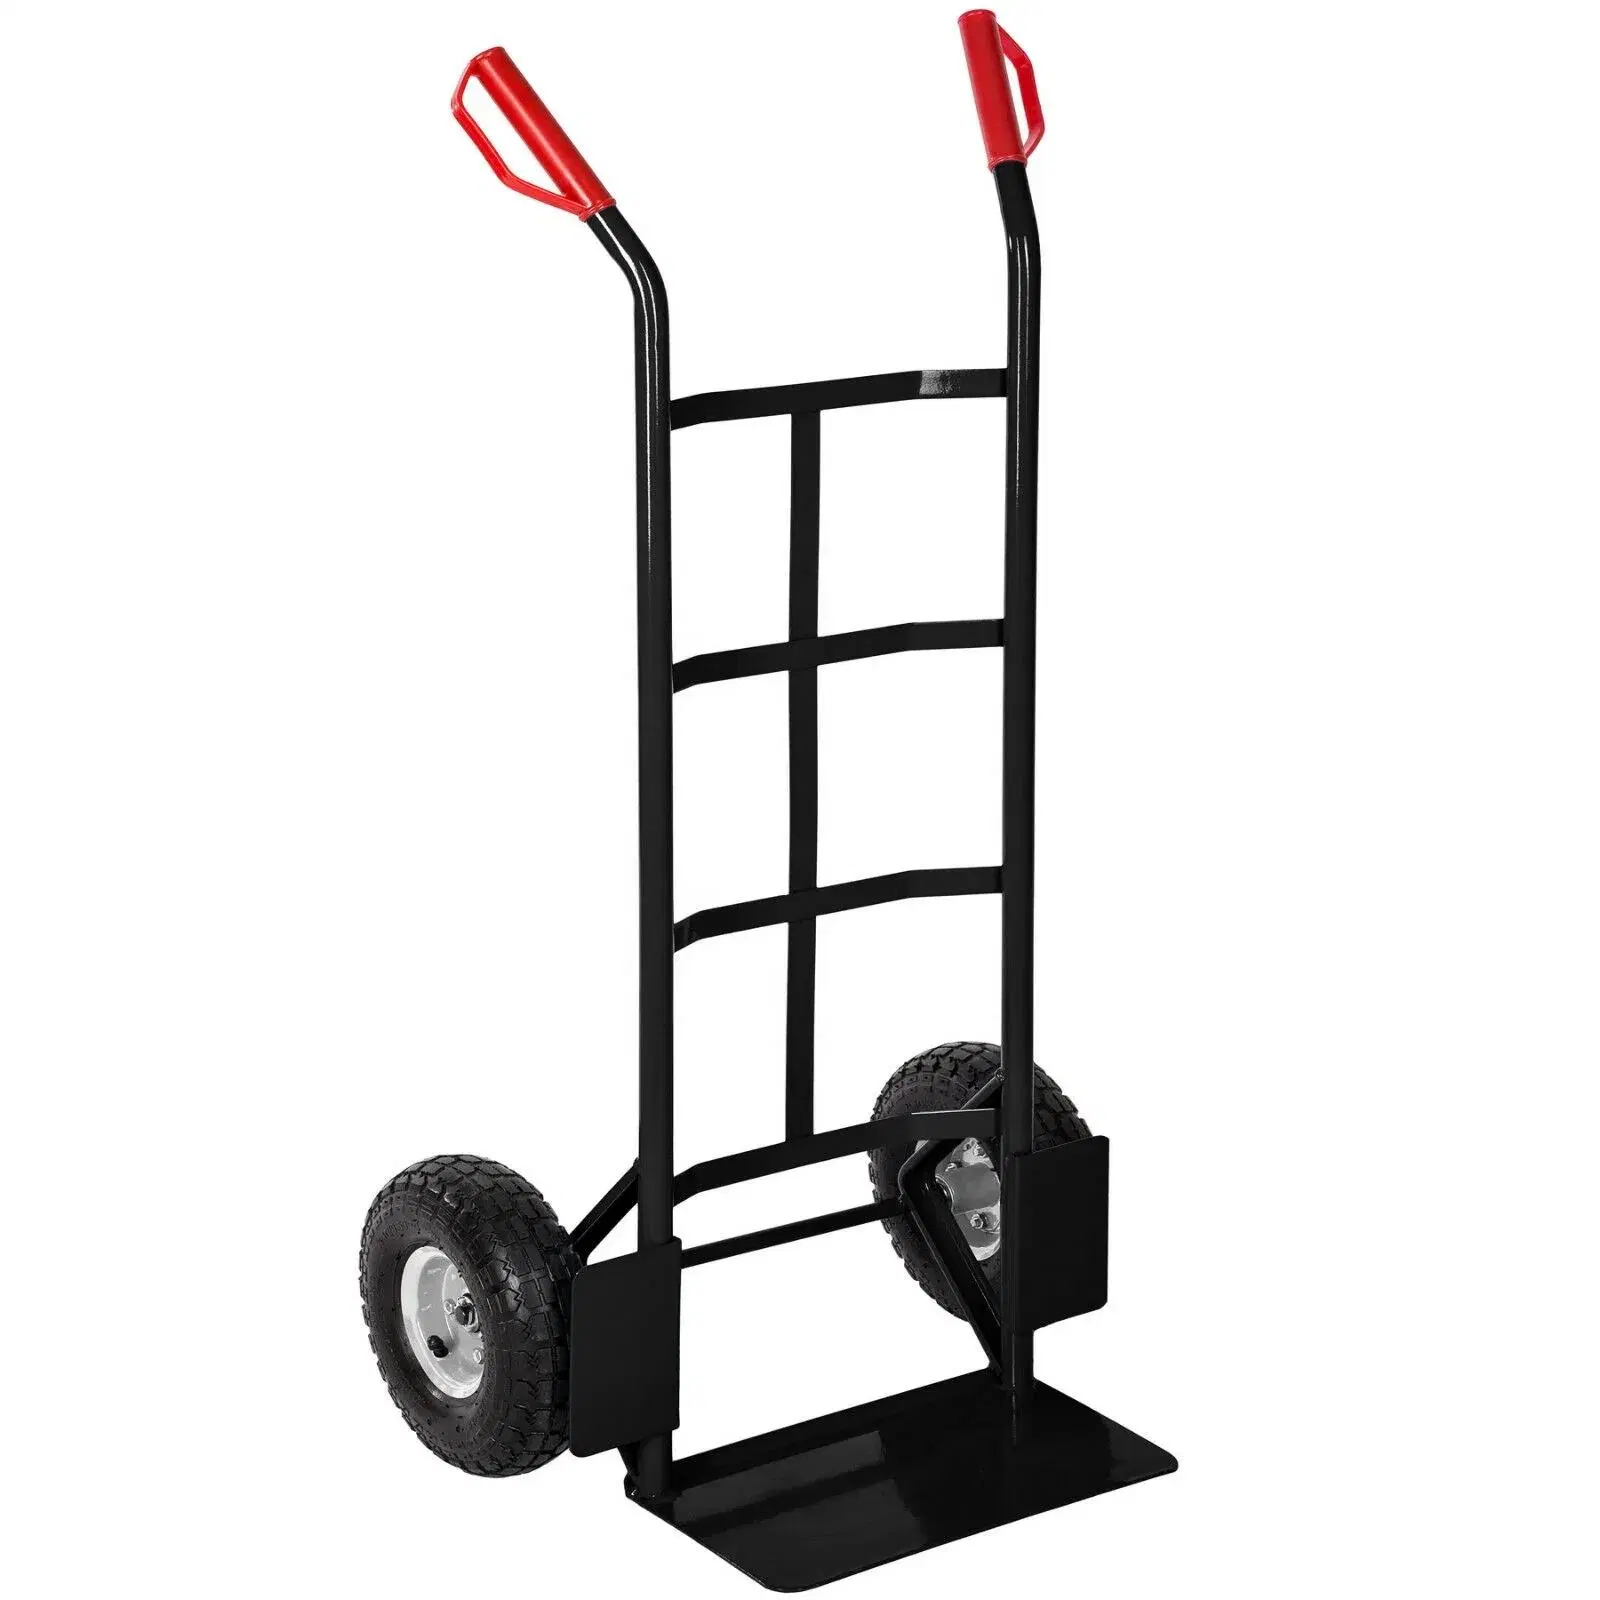 Hand Truck Hand Trolley Ht1830 with 2 Pneumatic Wheels